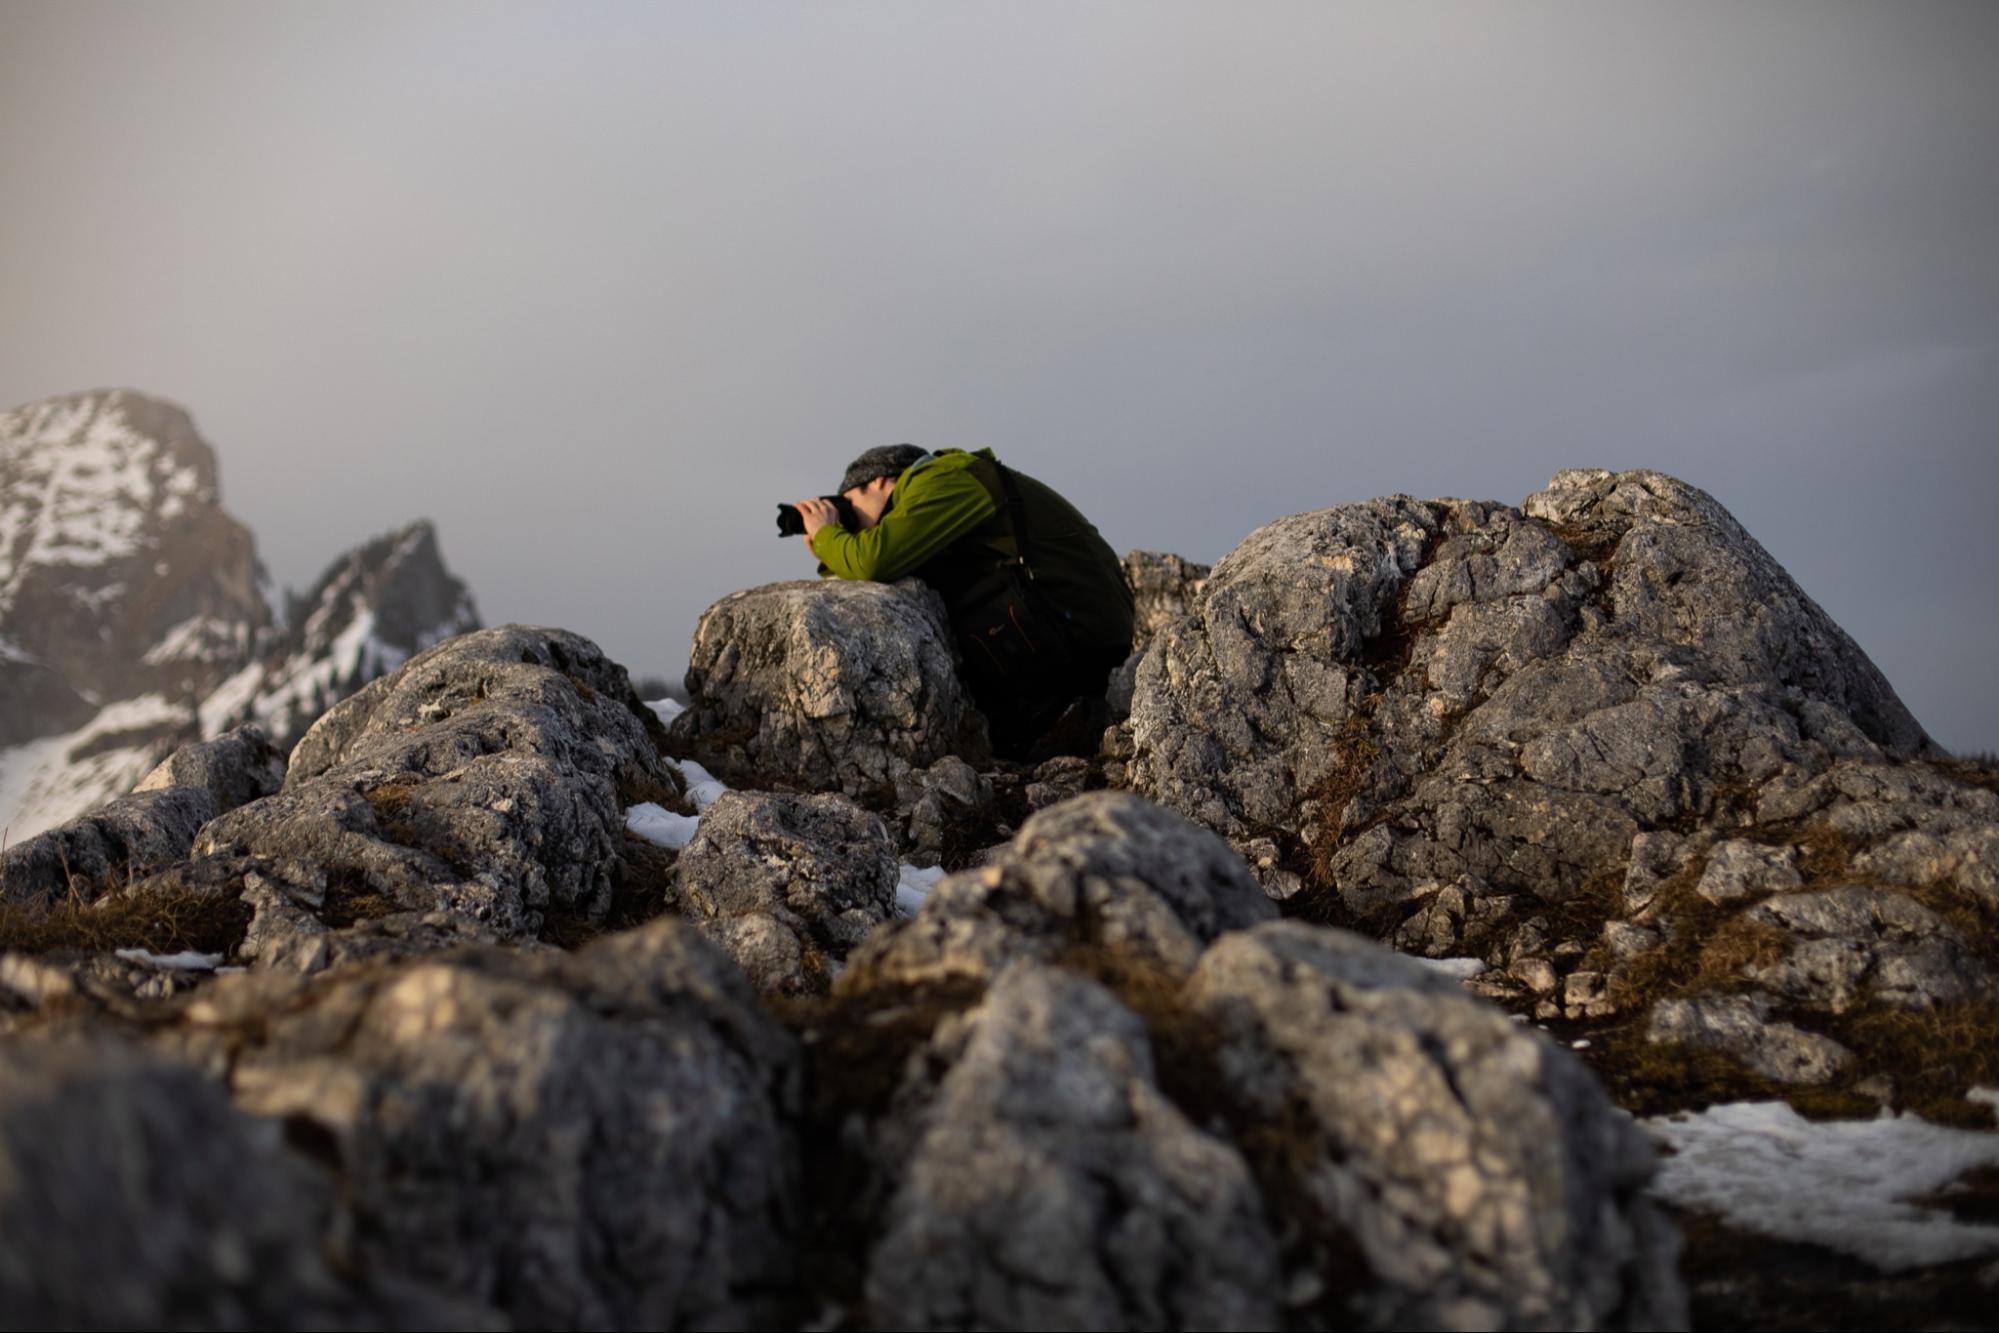 A photograph of a photographer shooting among mossy rocks, with a grey sky in the background. Photo by Benjamin Kaufmann.